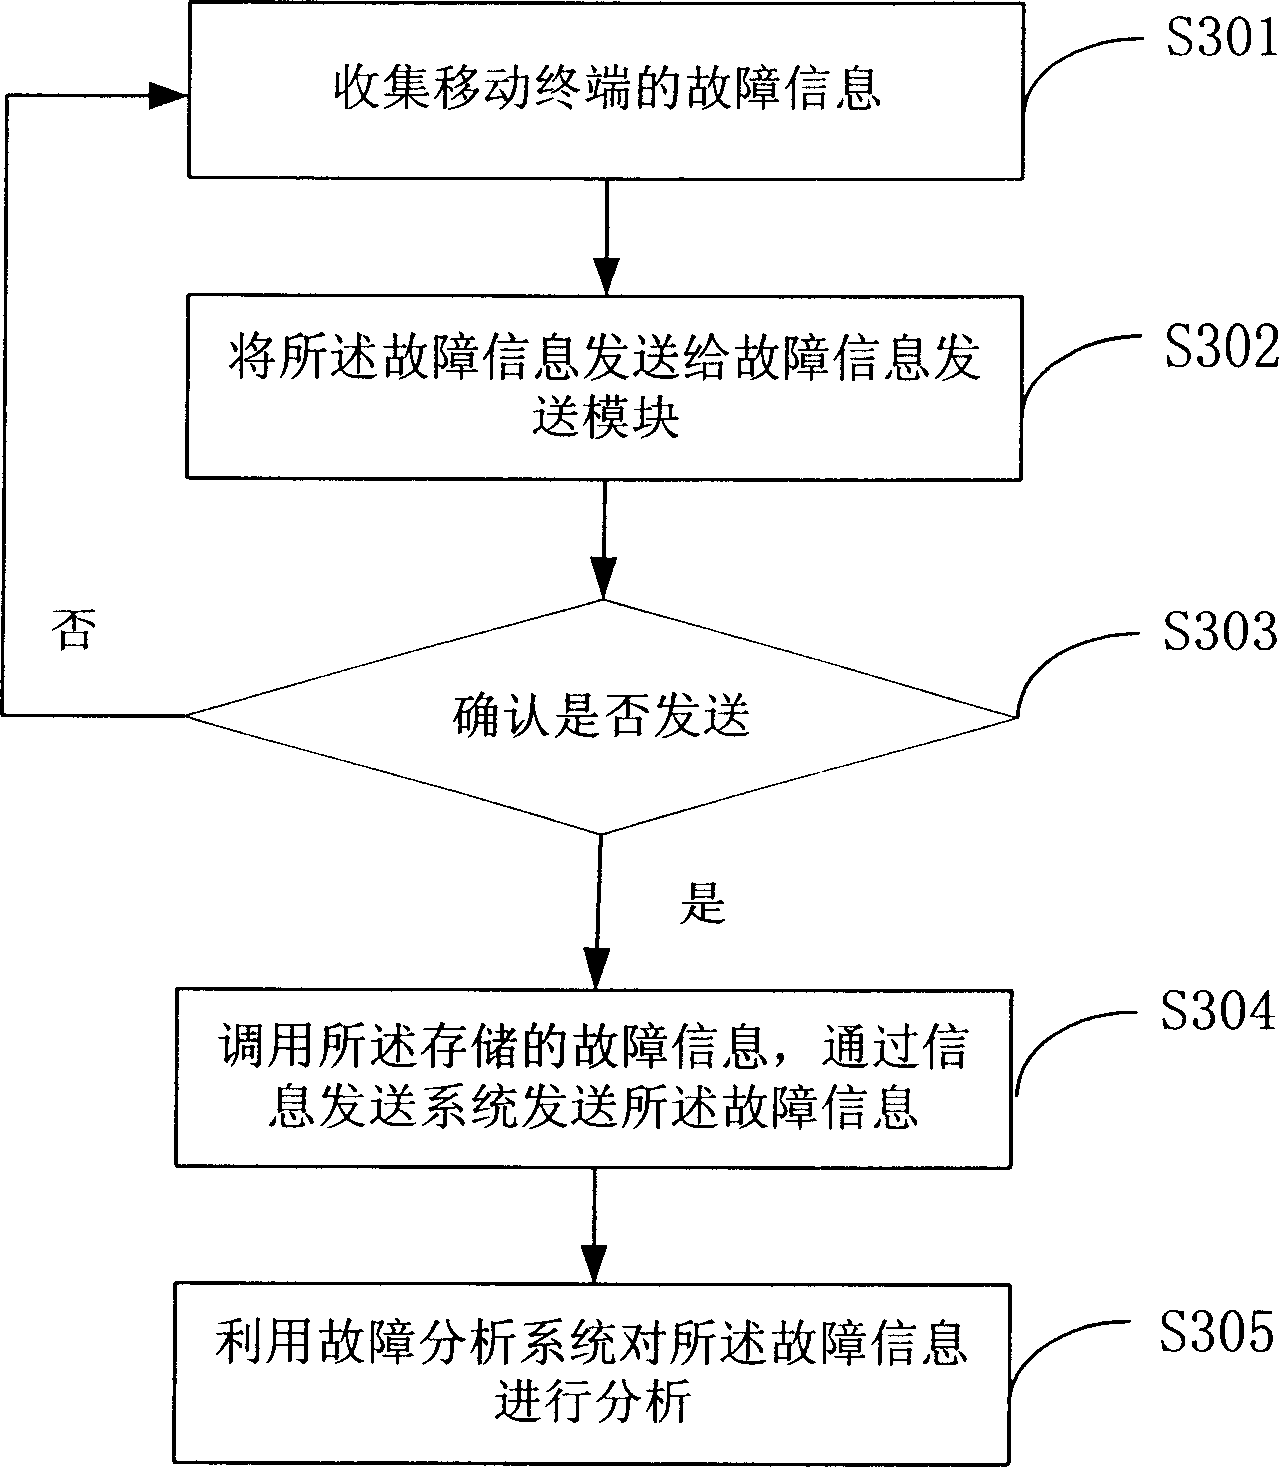 Fault information collection system and method